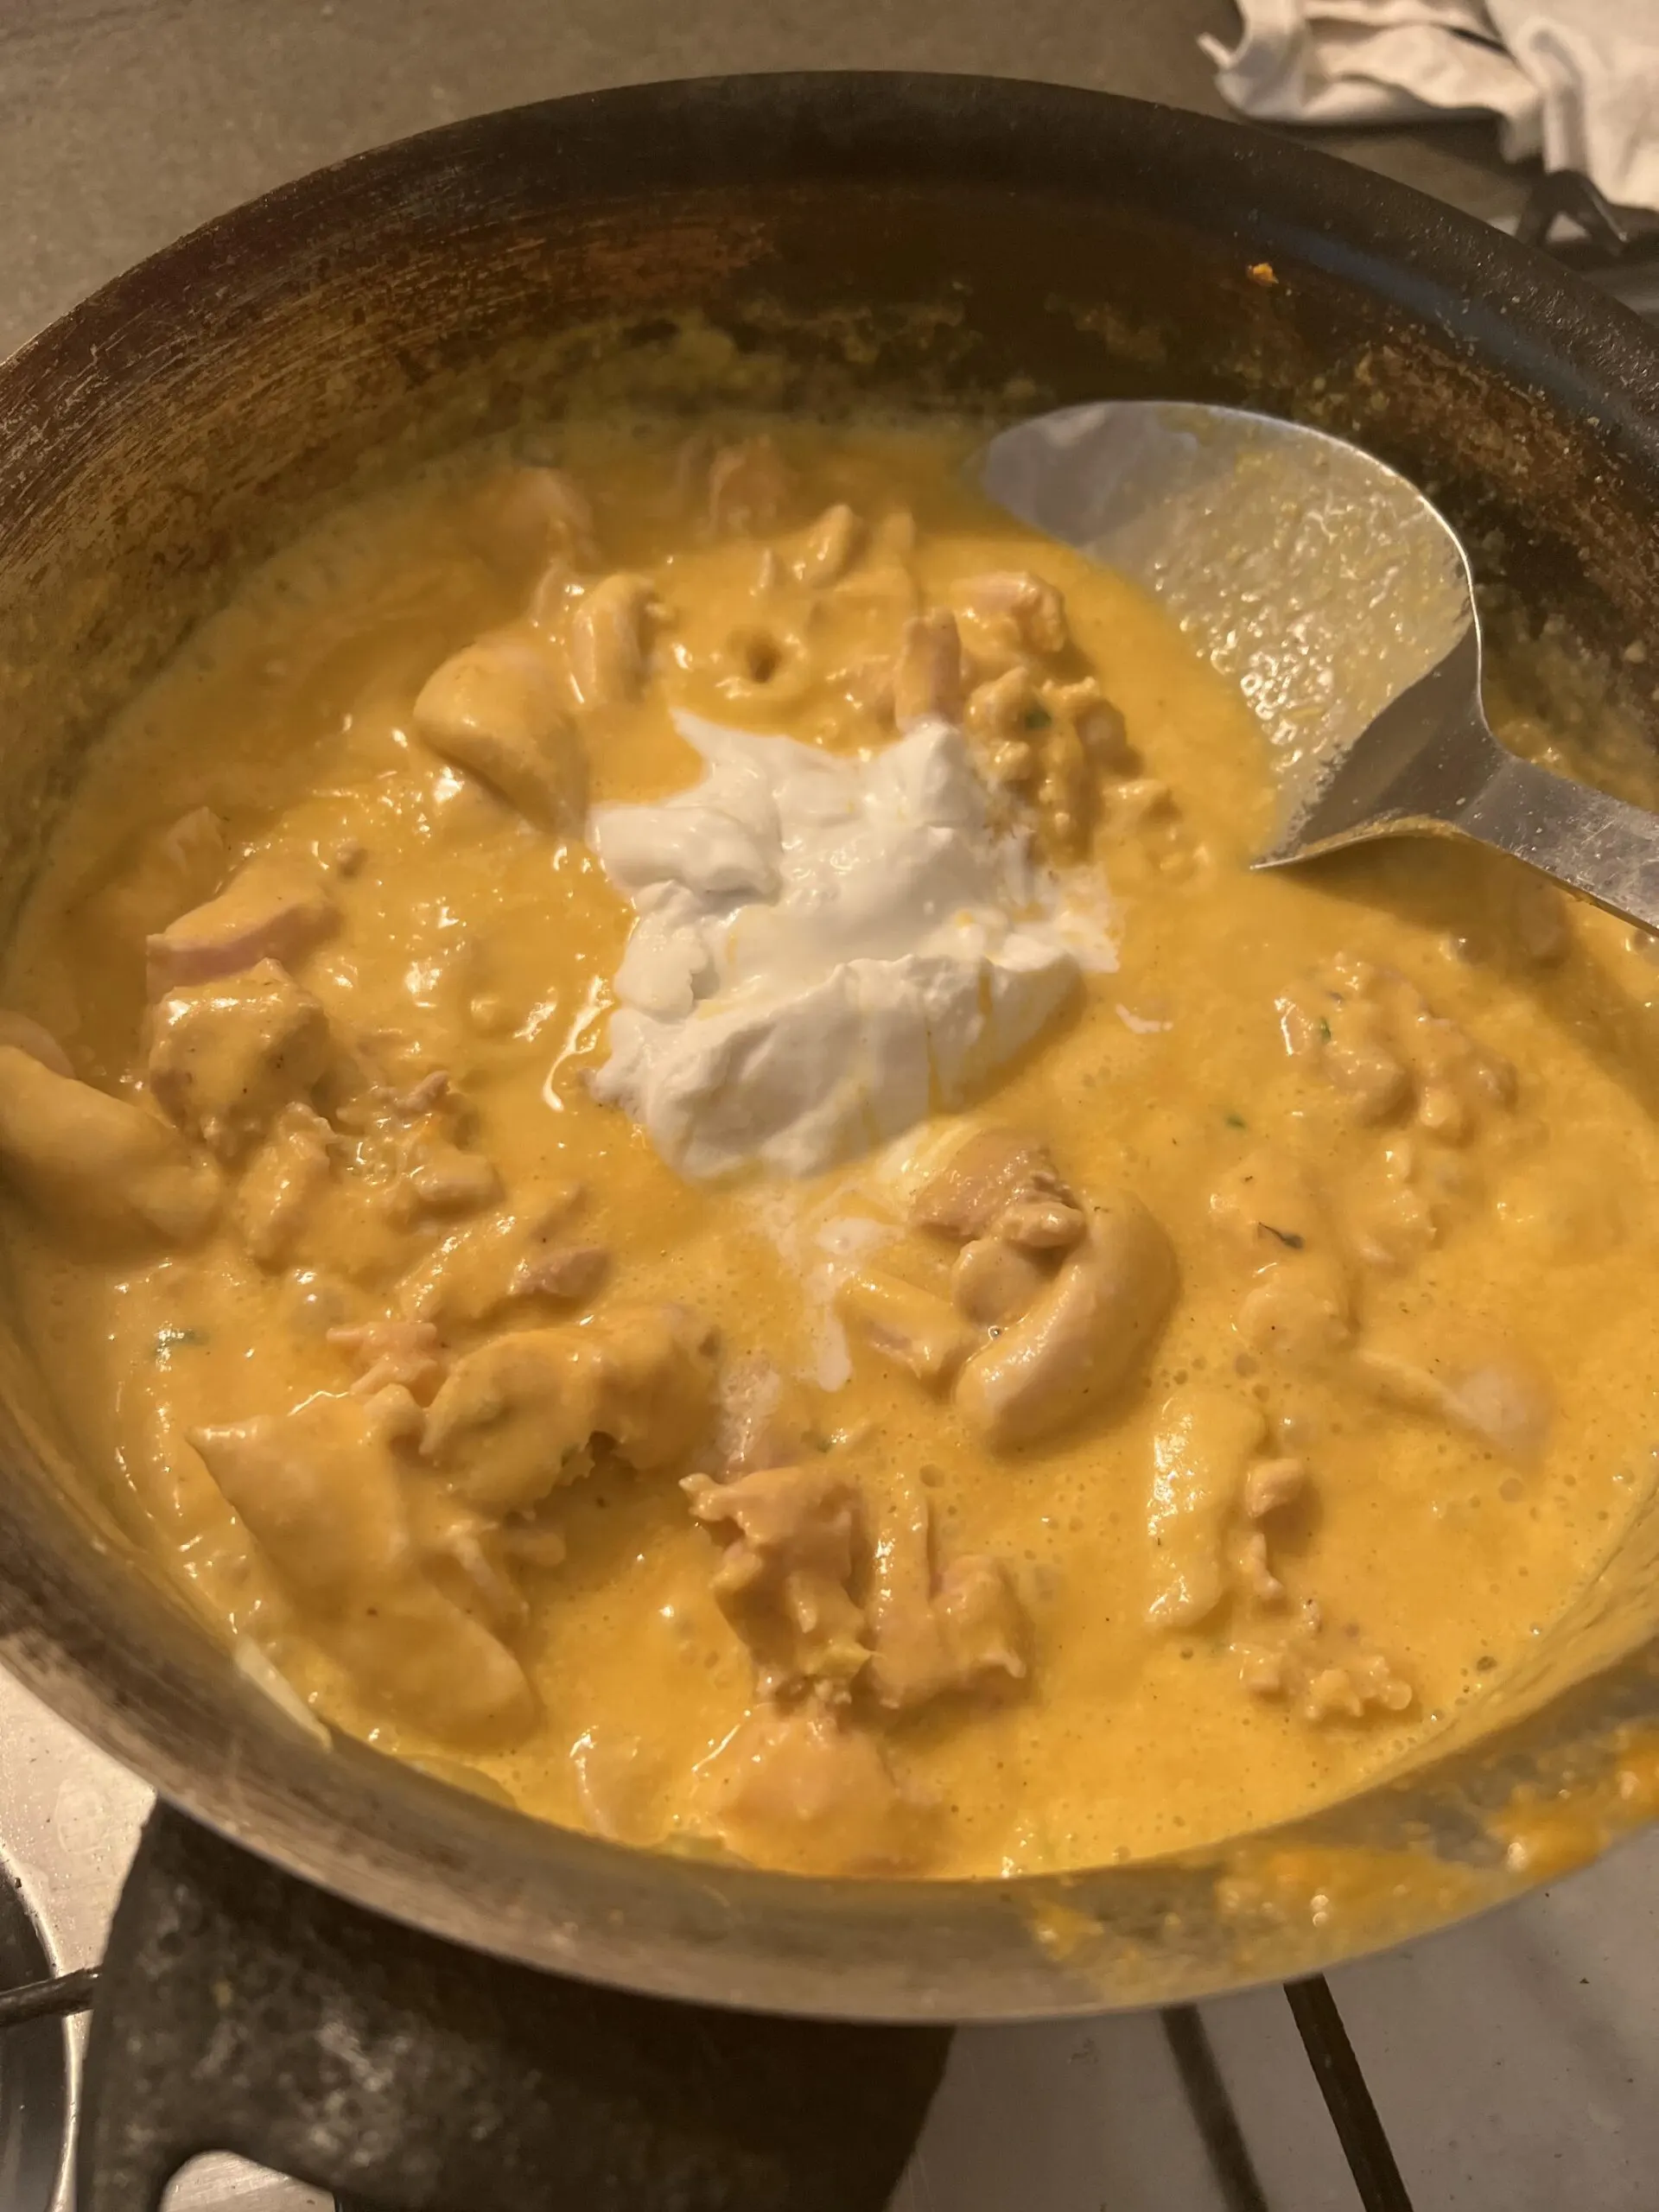 Adding coconut cream to the curry